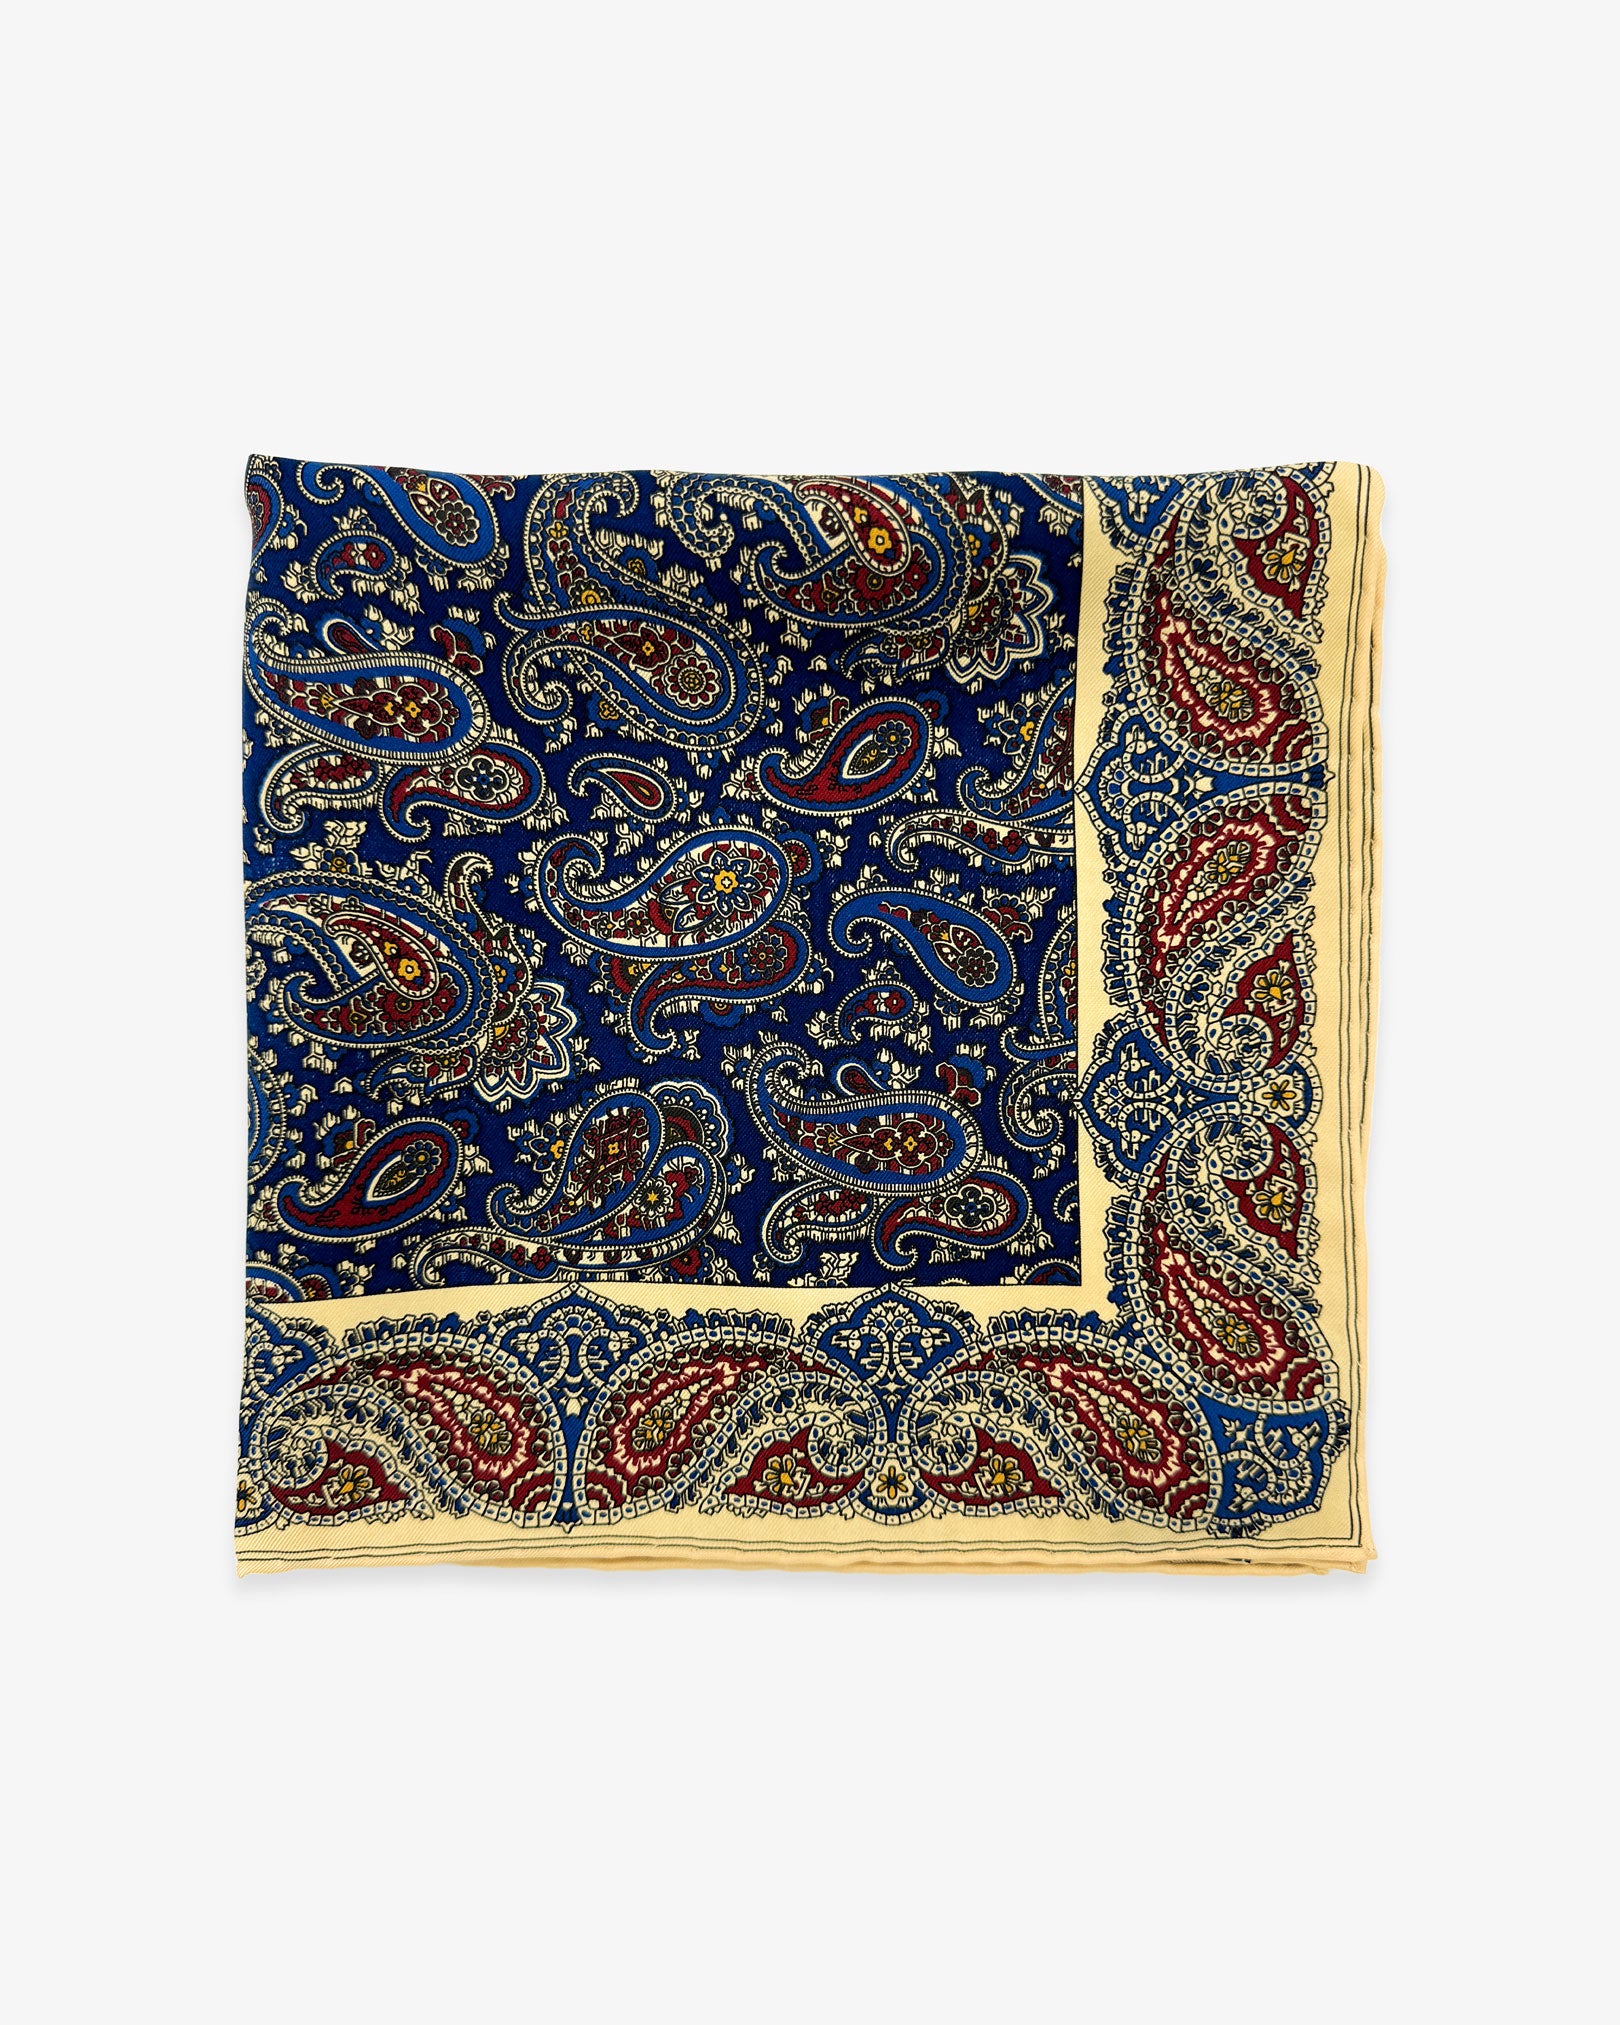 The 'Abbotsbury' pocket square from SOHO Scarves Madder silk collection. Folded into a quarter, showing the intricate inner and outer paisley decoration in blue, red and cream.